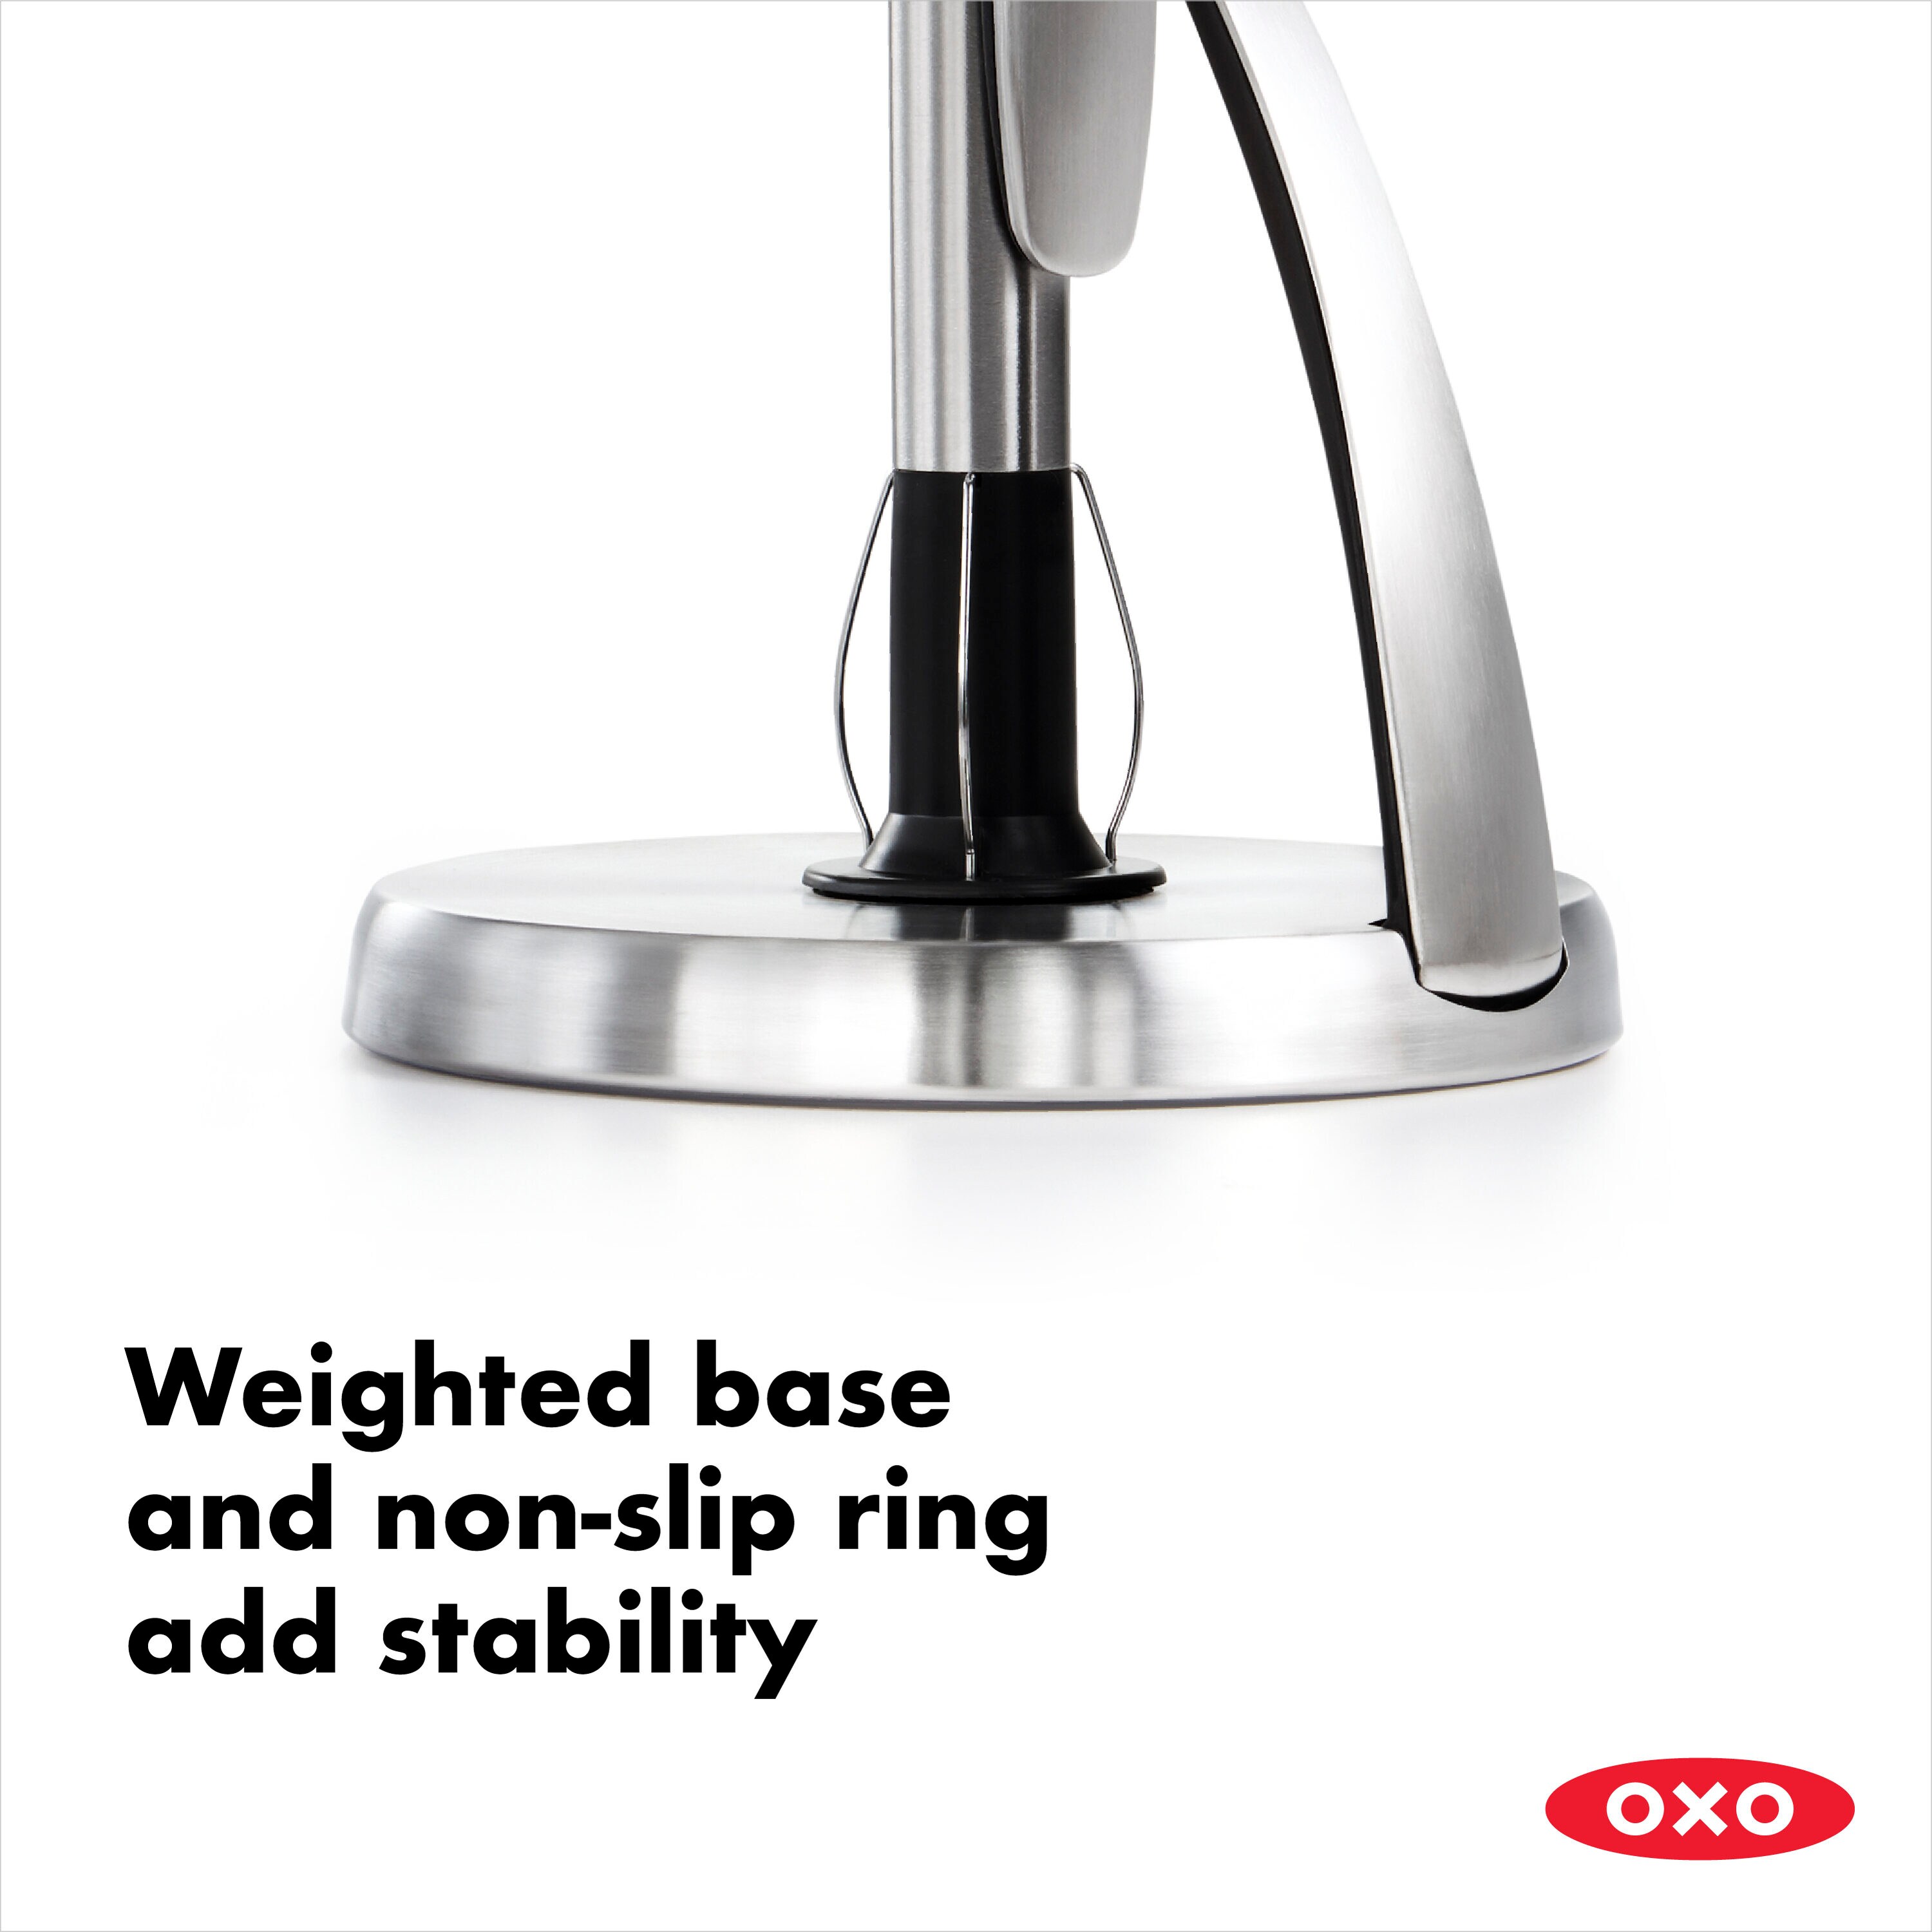 OXO MOUNTED PAPER TOWEL HOLDER – Belle Cose